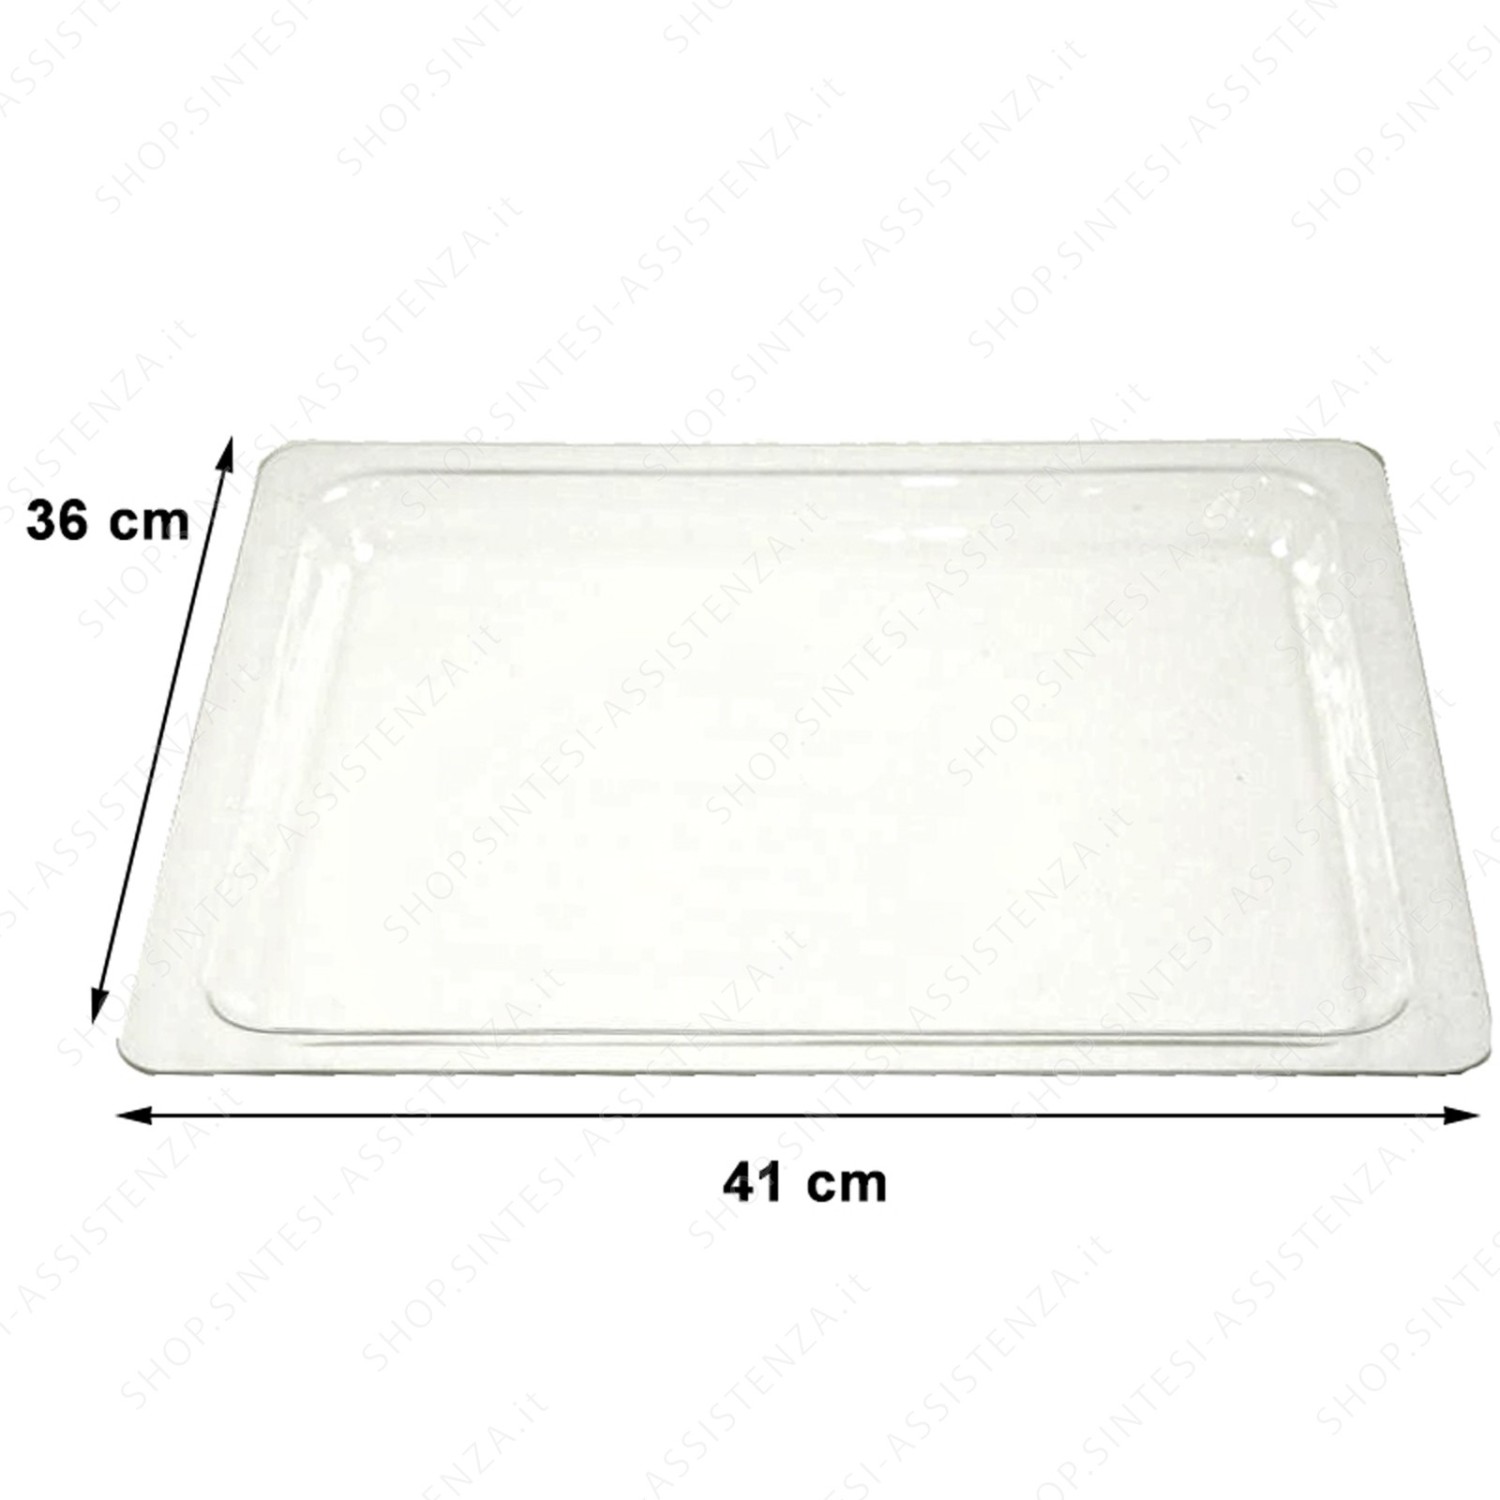 GLASS OVEN TRAY MEASURES 36 X 41 CM S45 SC45 770370451 - 770370451